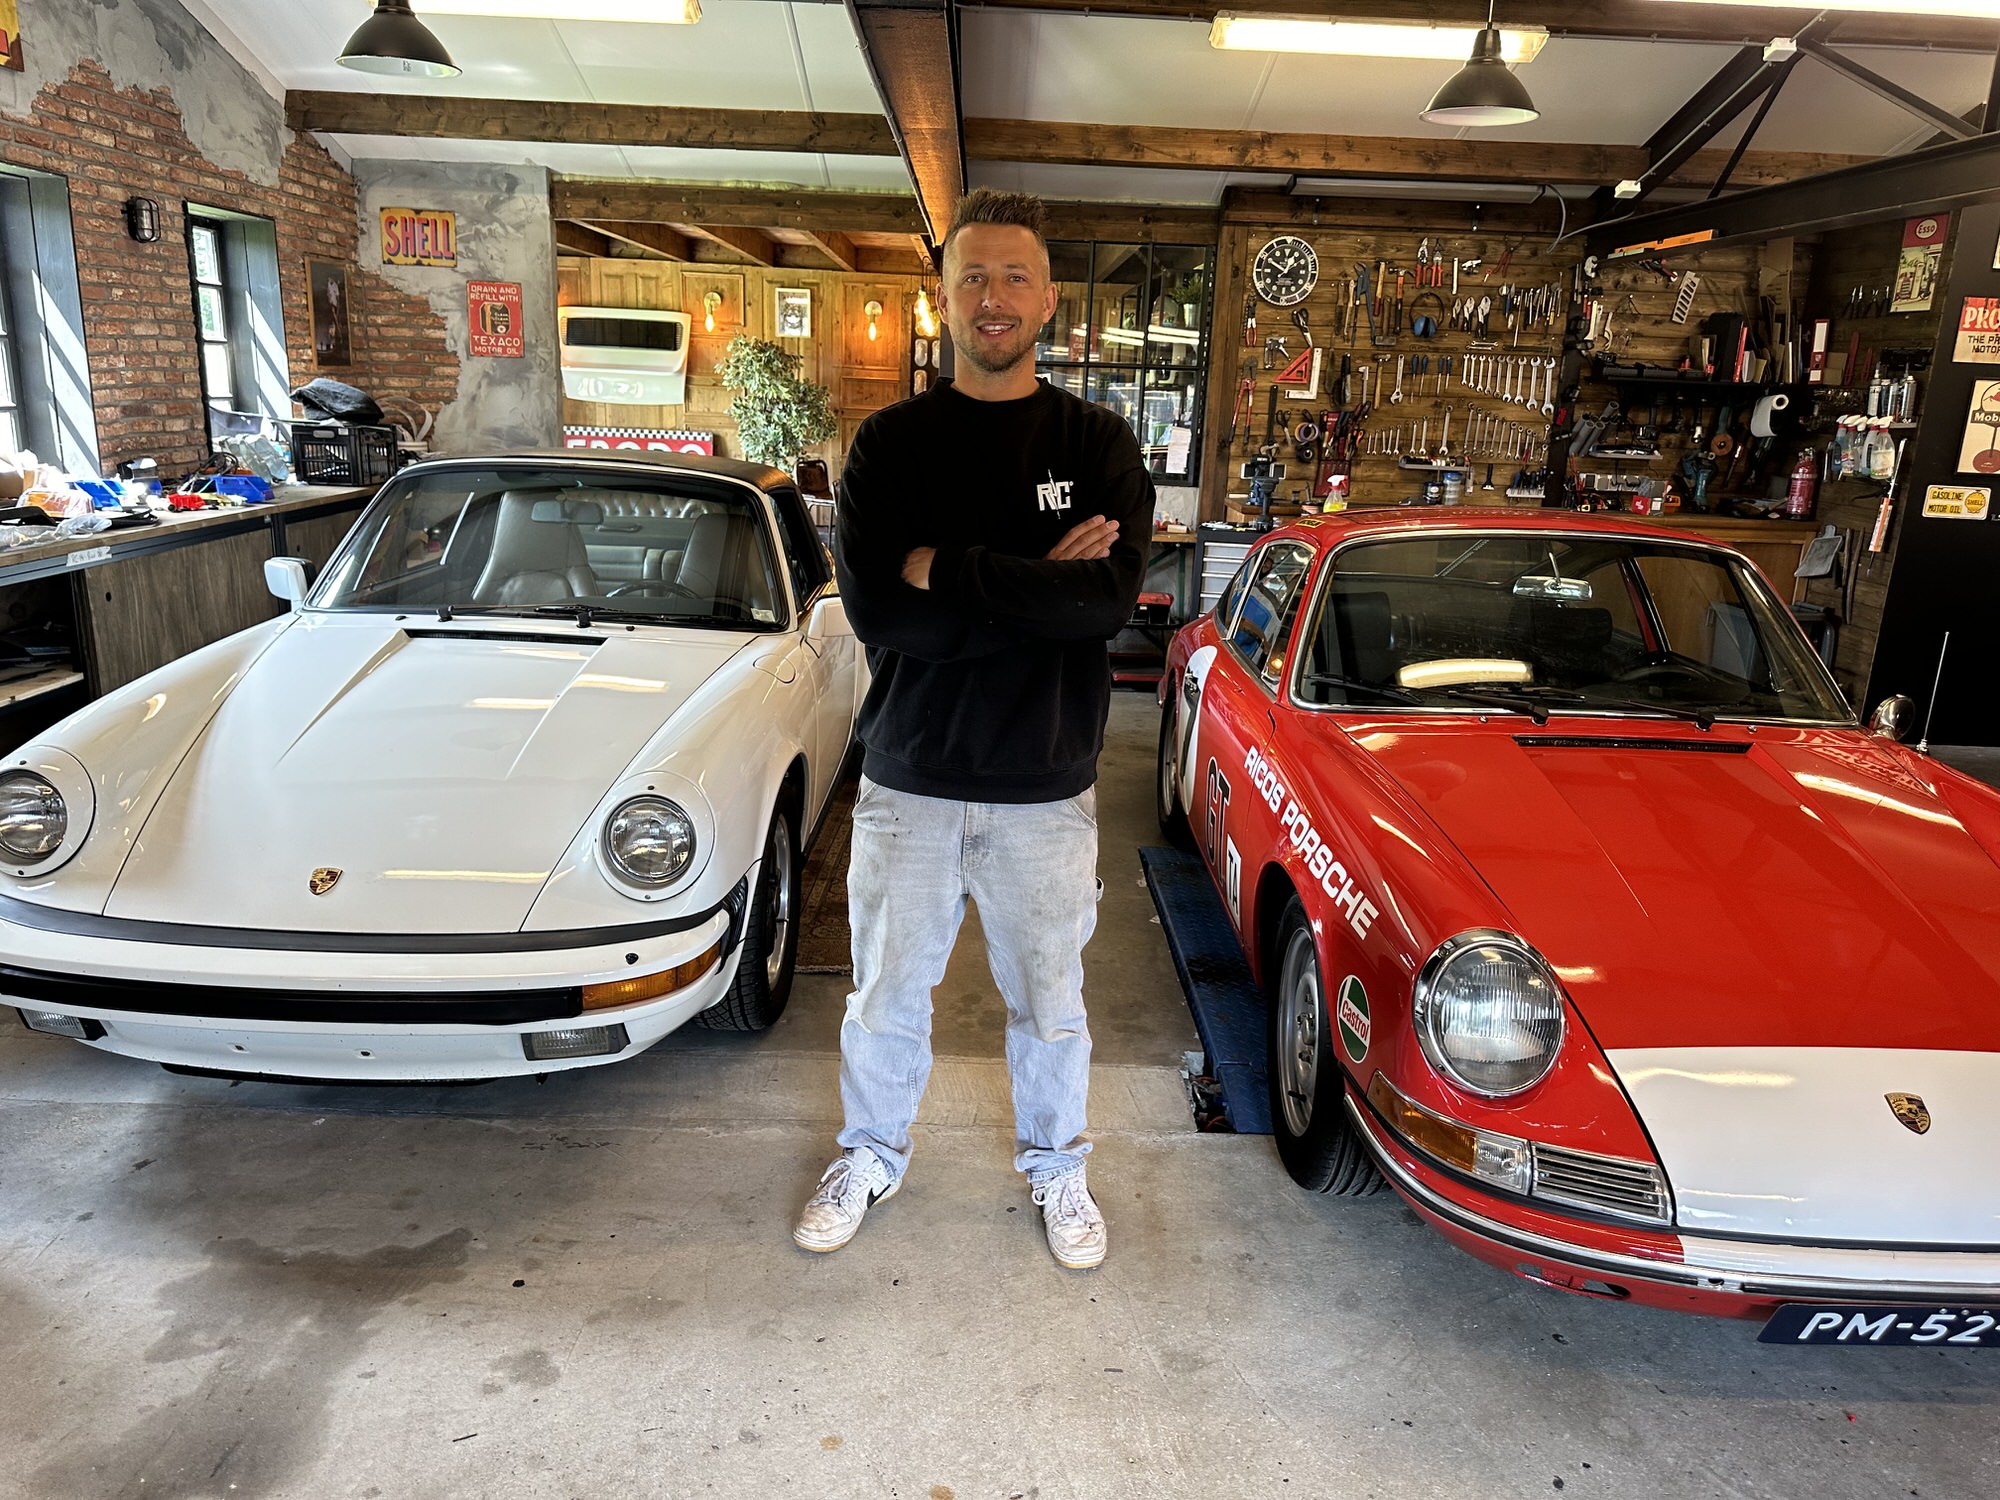 Air-Cooled: A Visit To Rico Customs